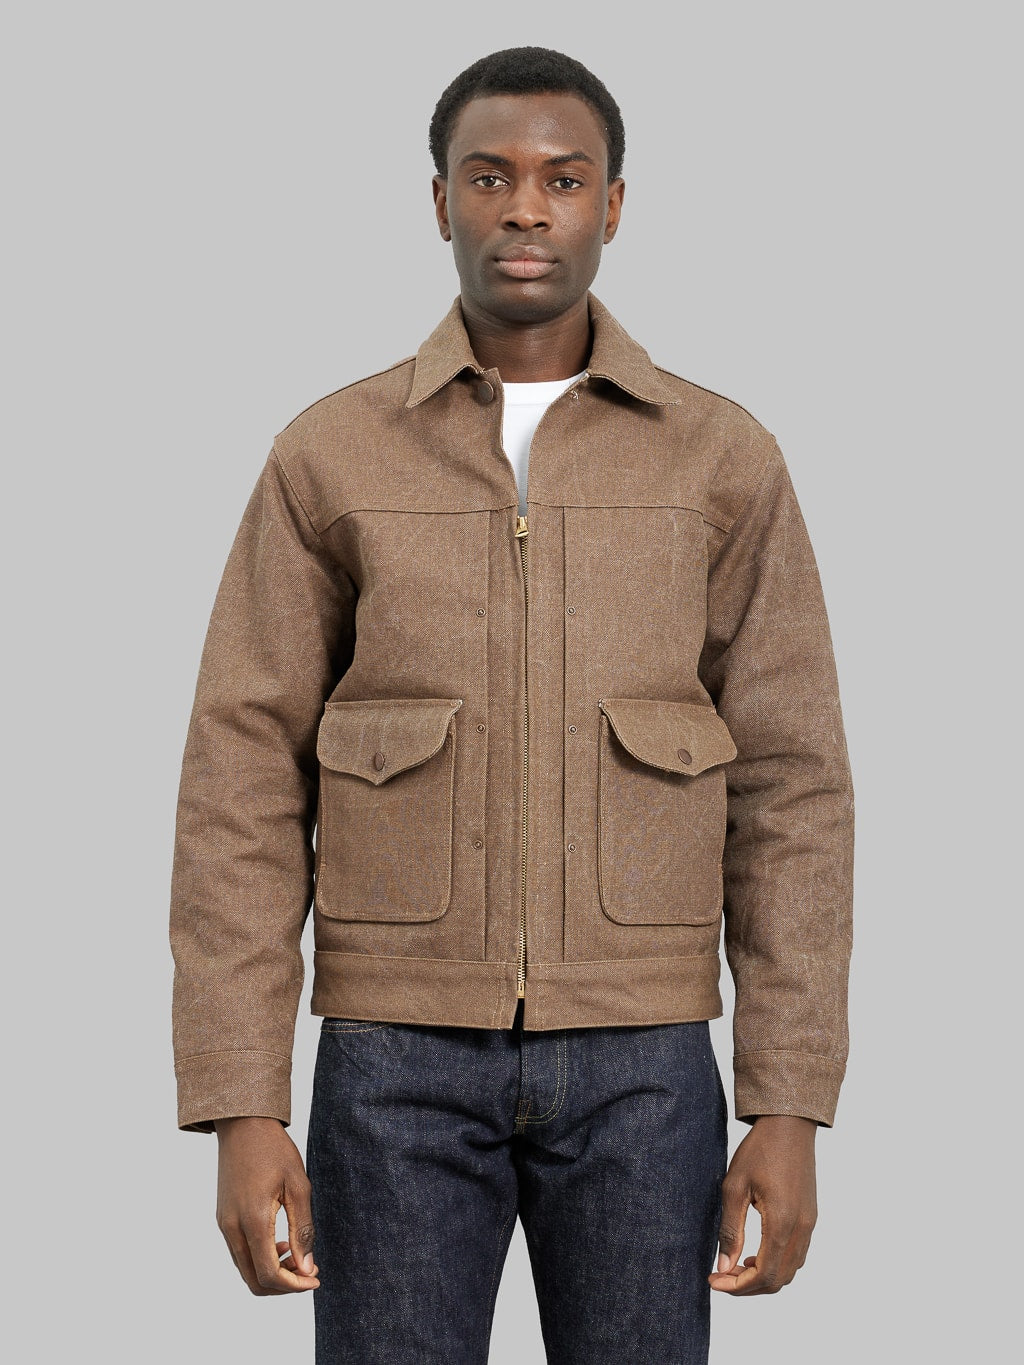 Freenote Cloth CD 4 Jacket Brown model front fit